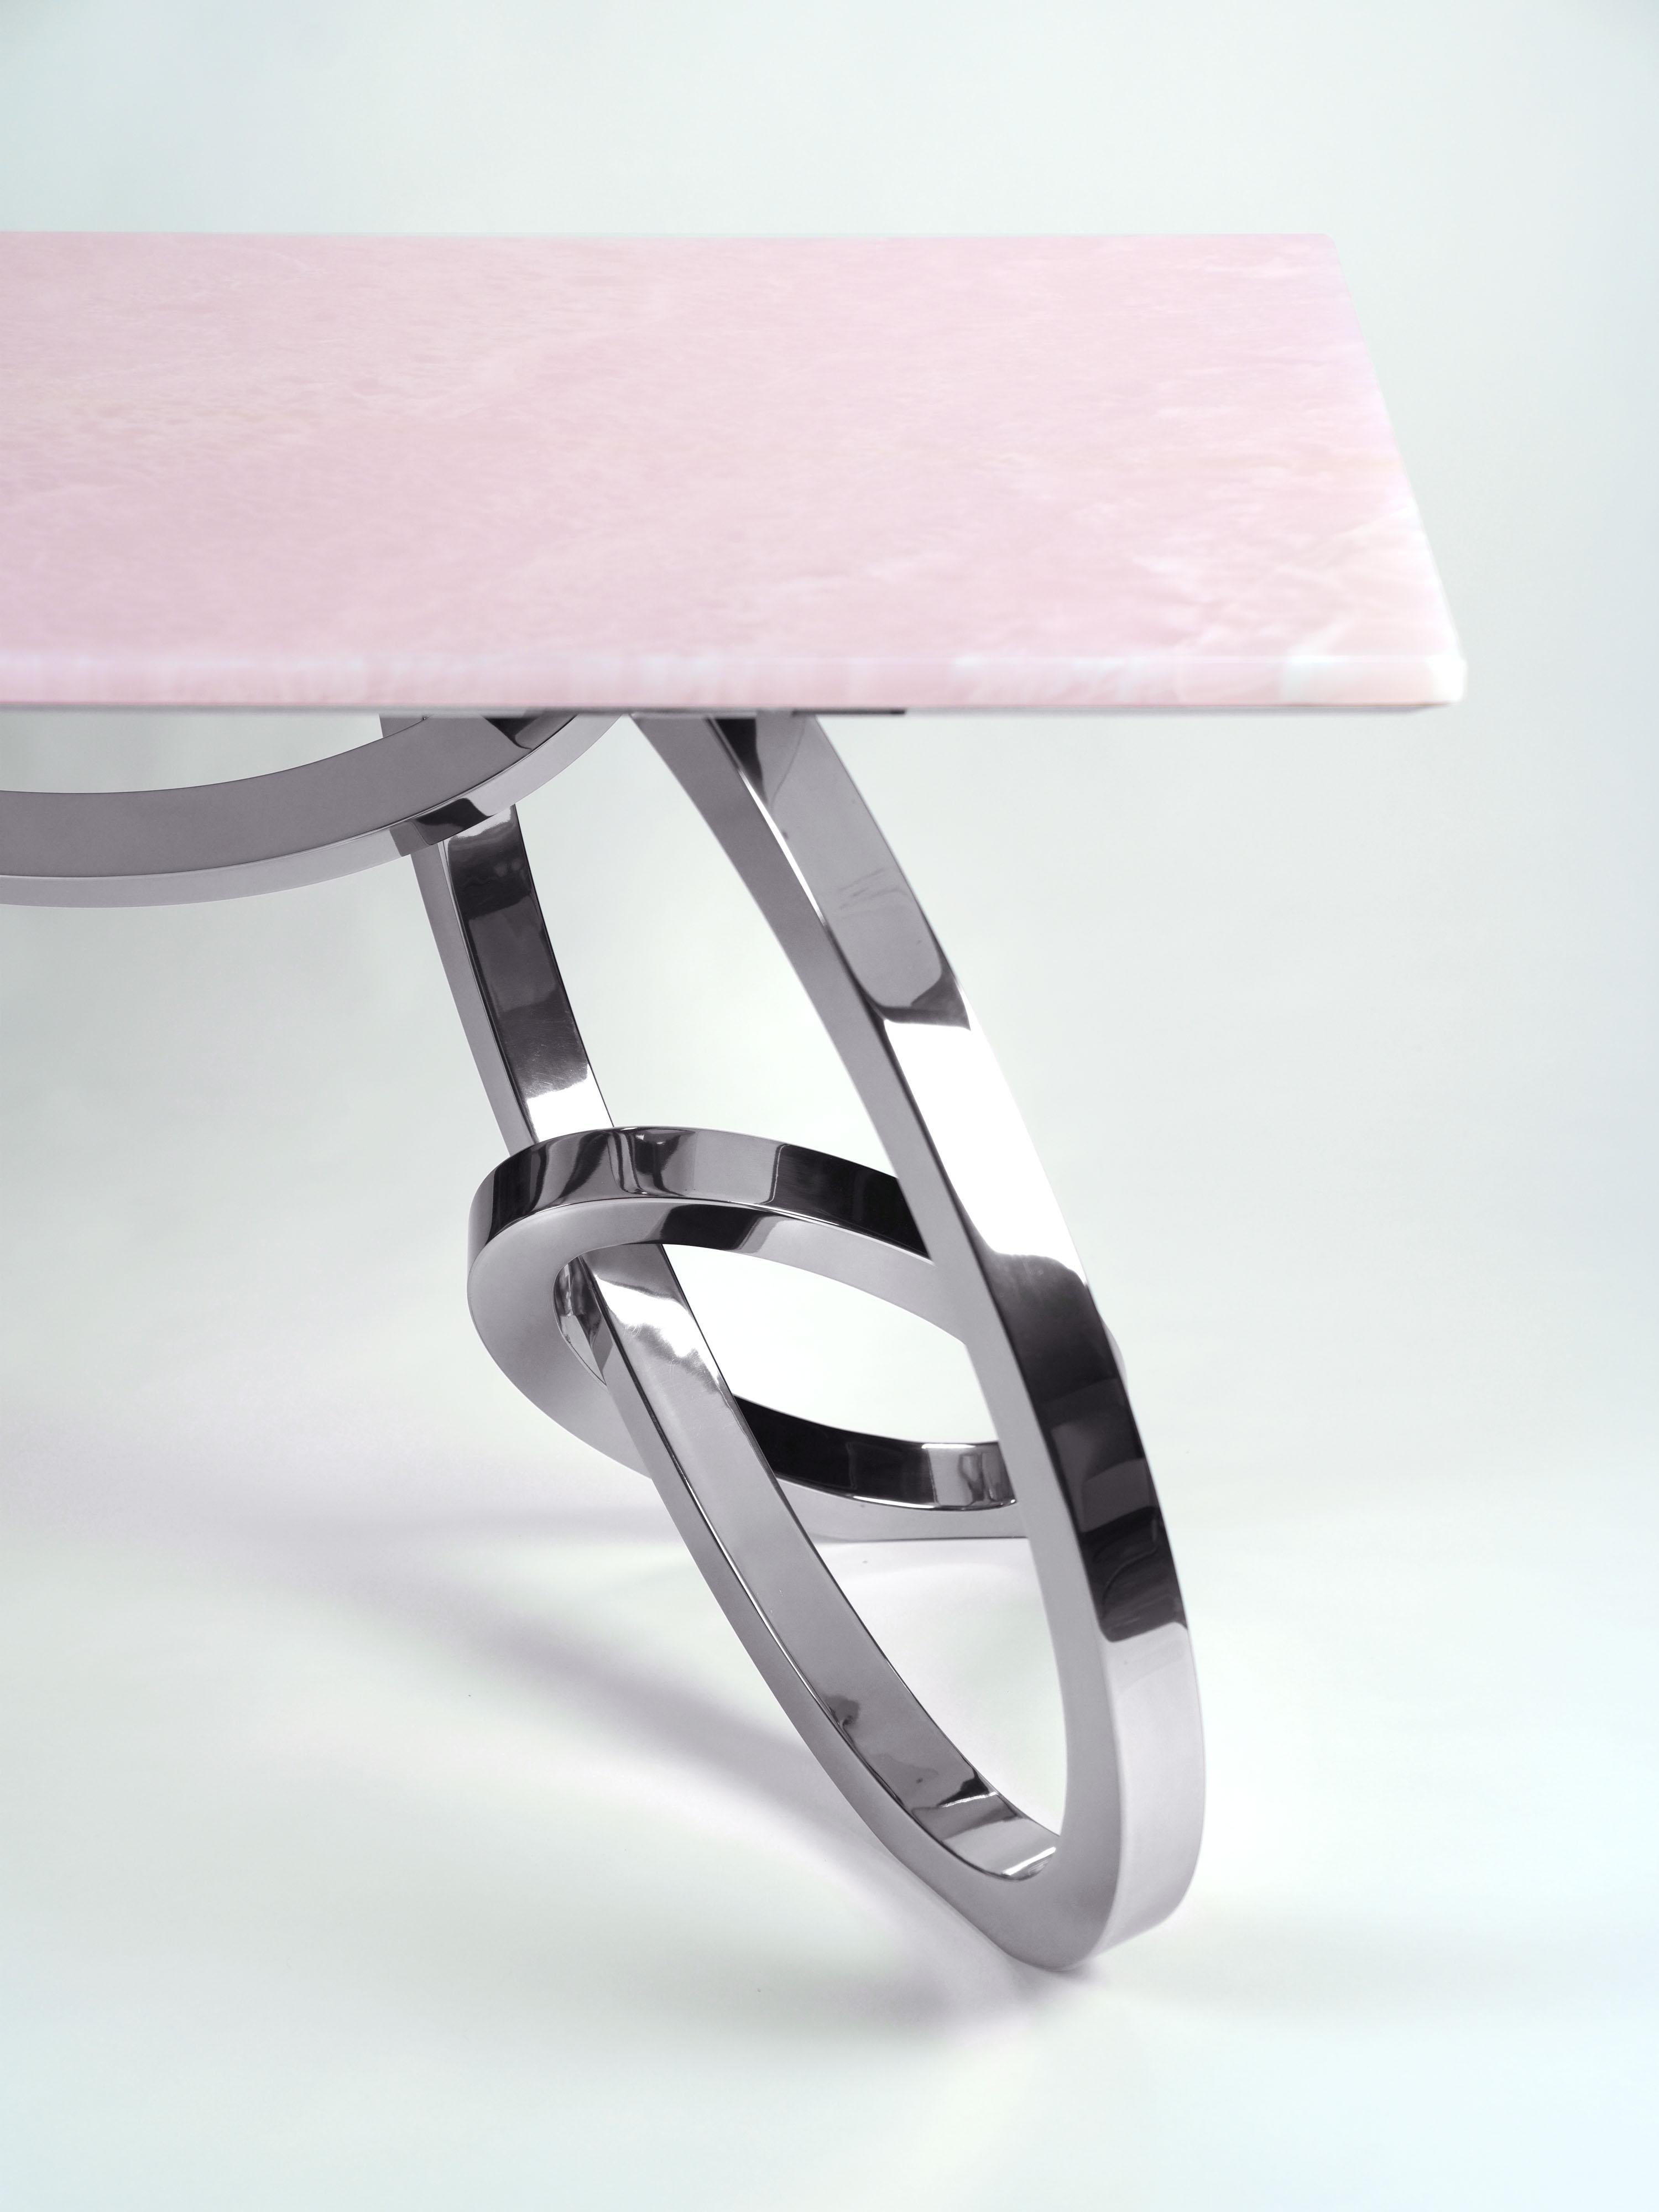 The 'Bangles Desk' is an important desk with structure in mirror polished stainless steel and top in rare pink onyx. Every single bangle is welded and highly polished by hand. The mirror-like finishing of the steel creates different perceptions of